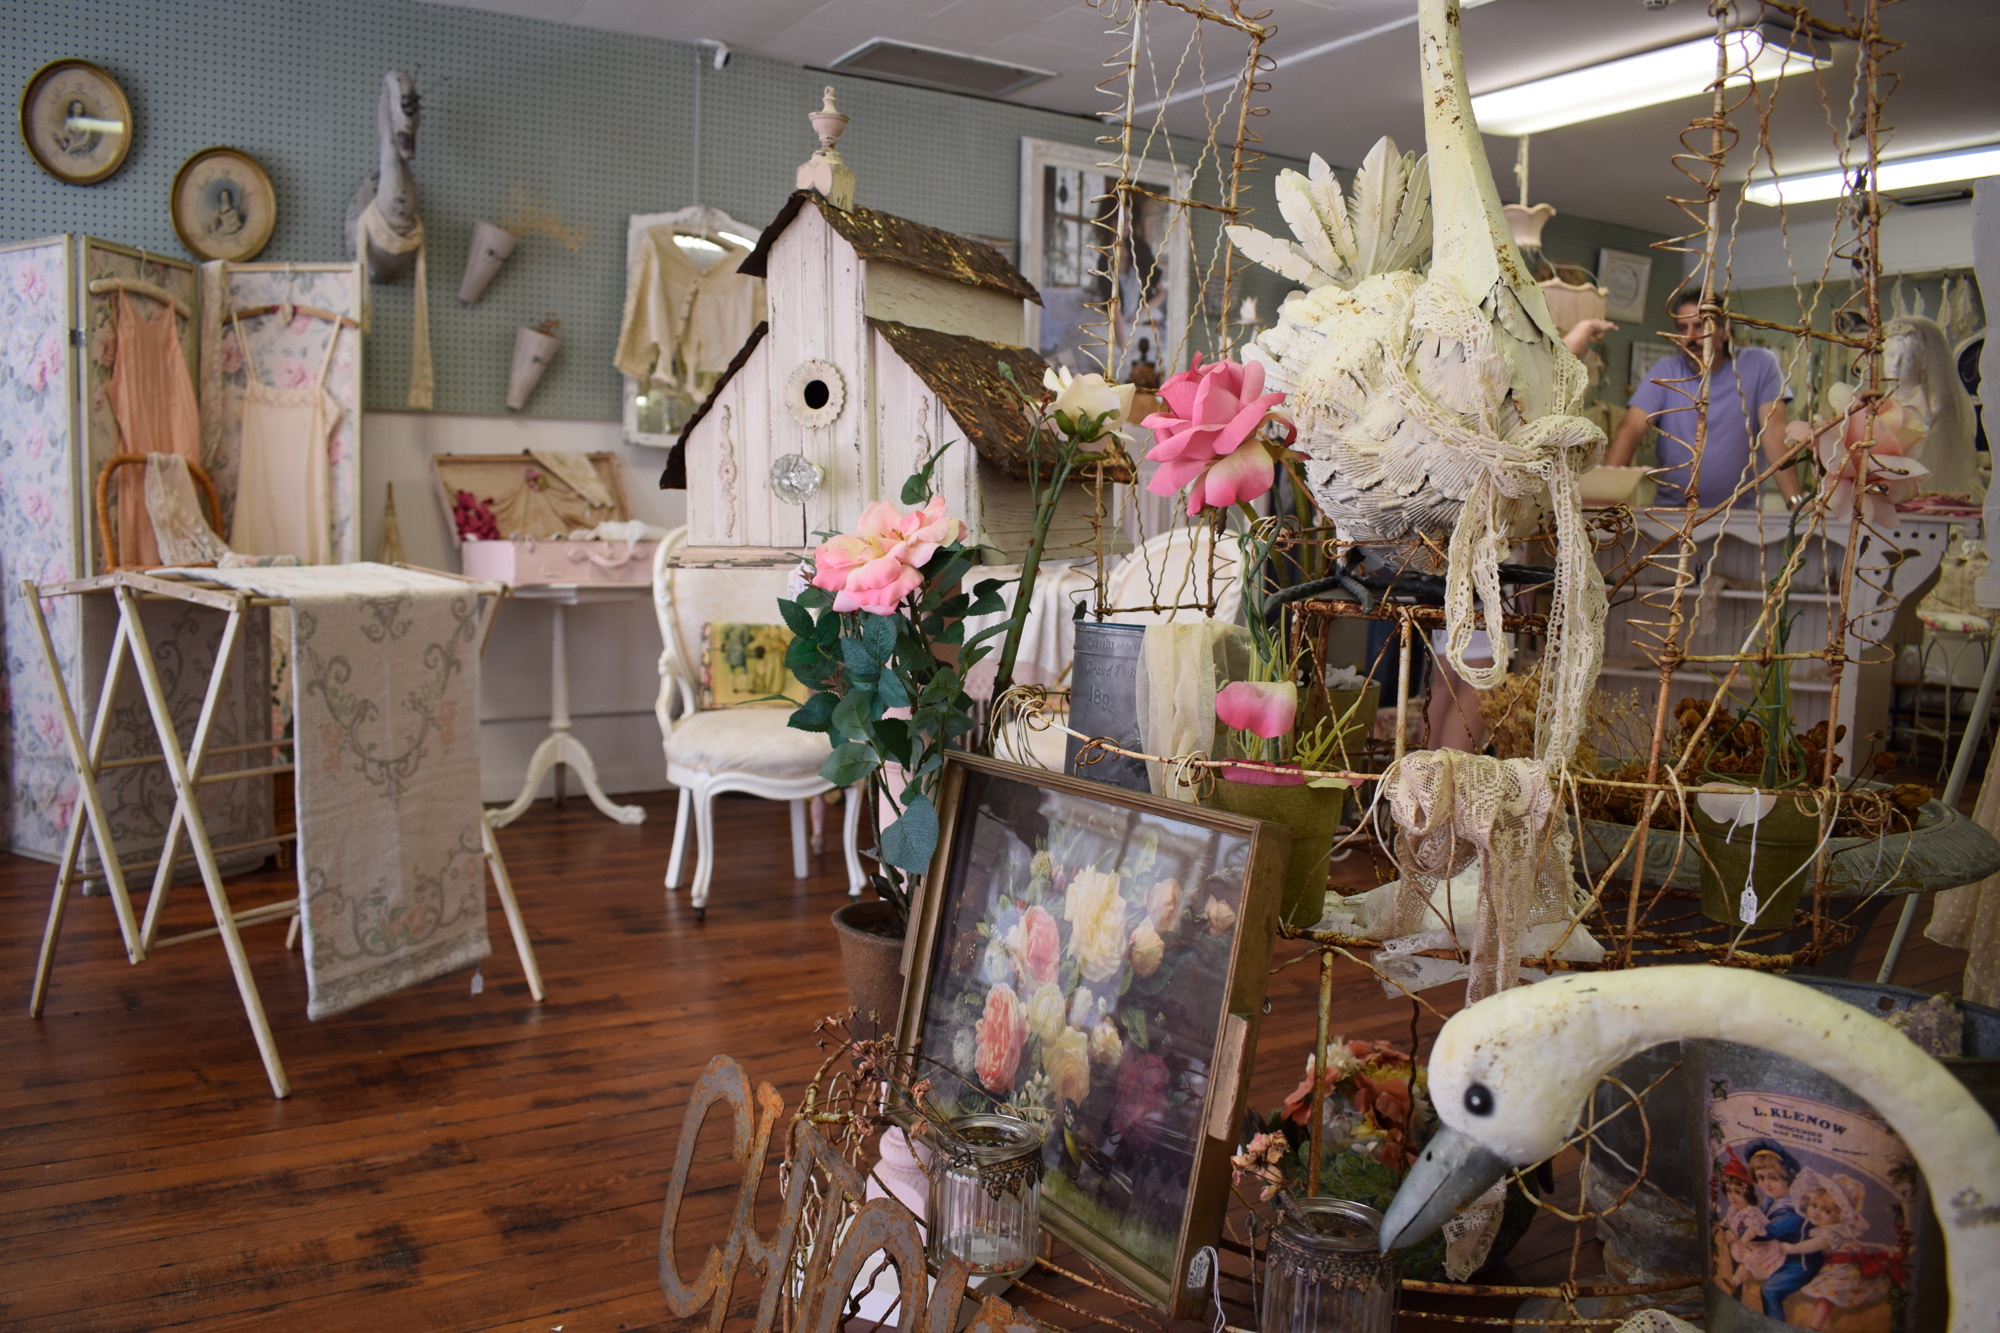 The Vintage Garden shop offers everything from pastel-hued gowns to metal decorative pieces.